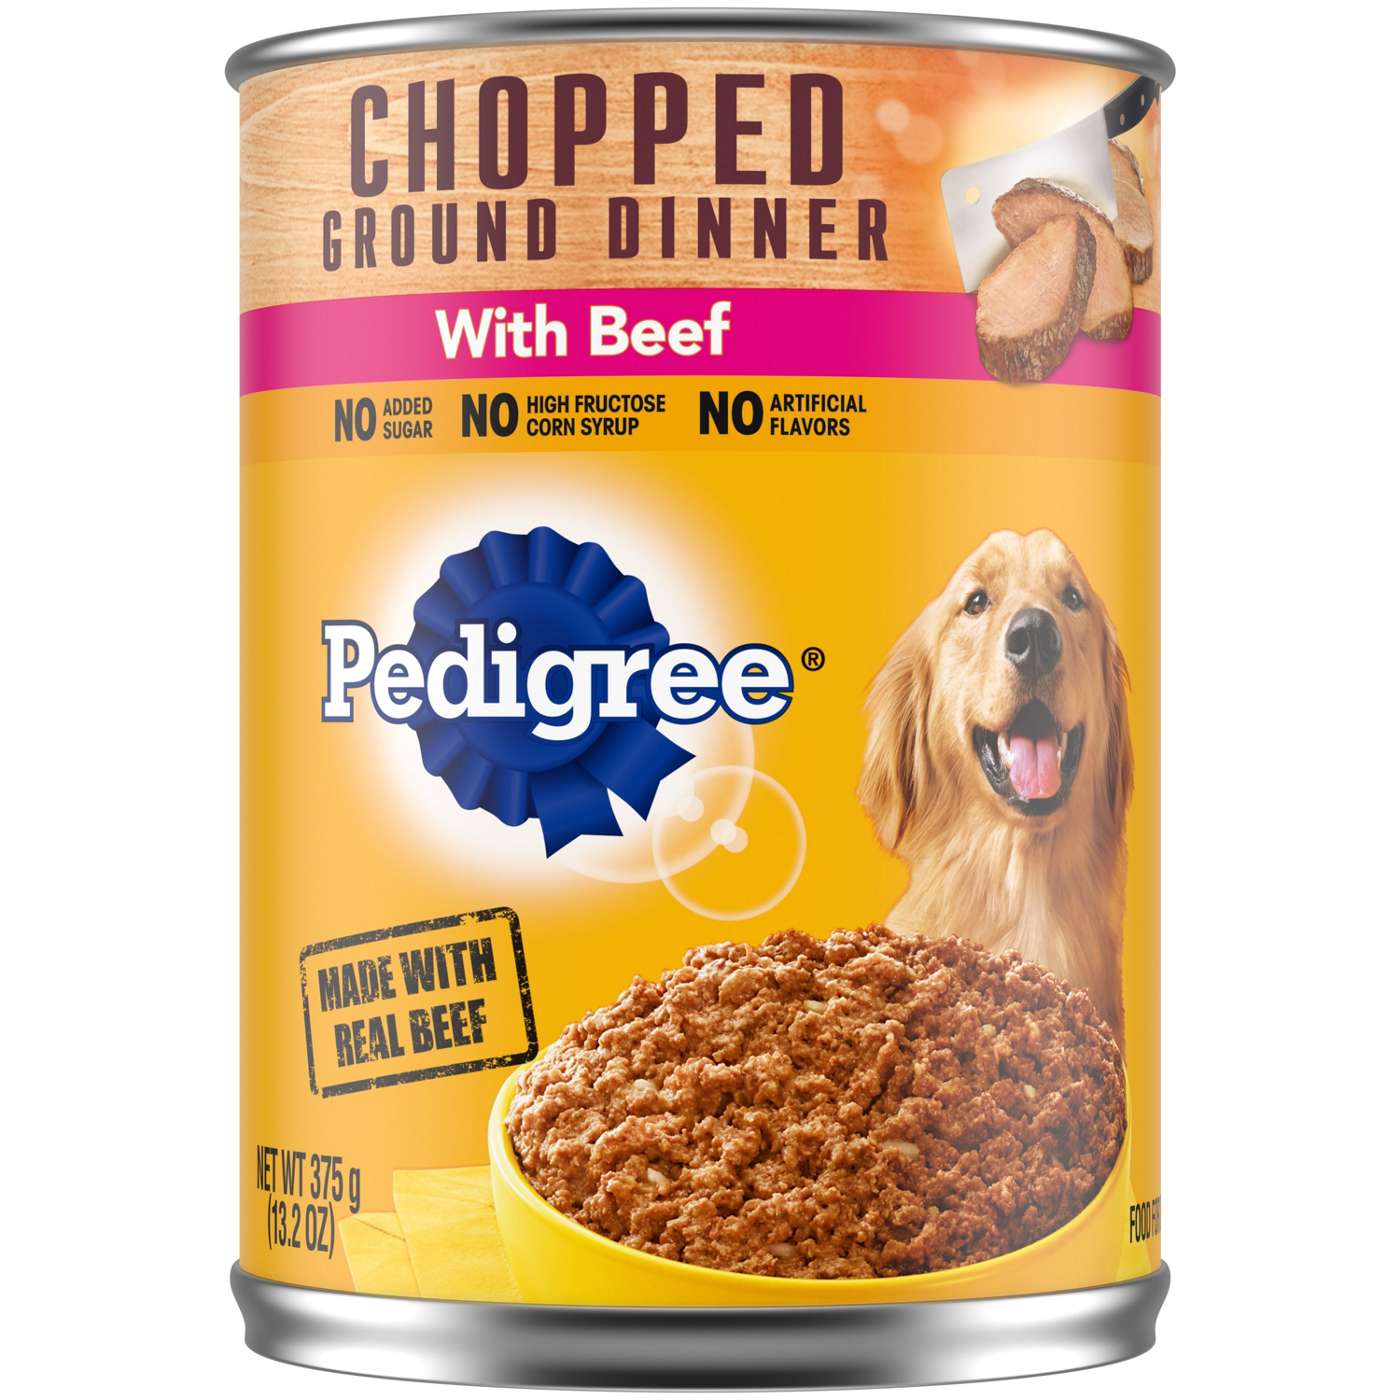 Pedigree Chopped Ground Dinner with Beef Soft Wet Dog Food; image 1 of 5